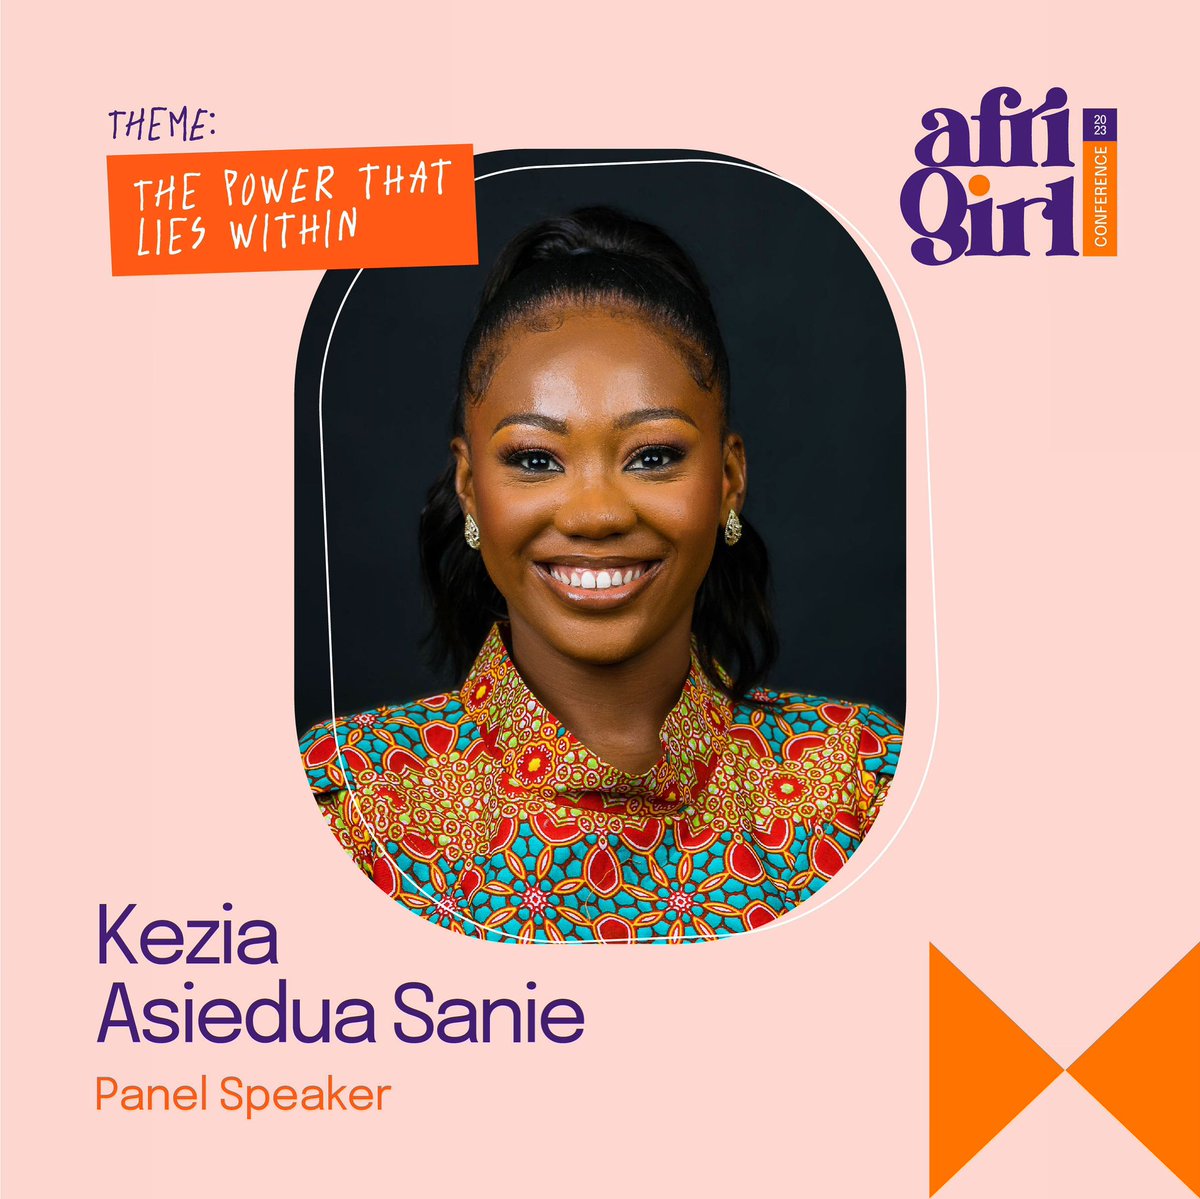 Meet our final panel speaker, Kezia Asiedua Sanie, founder of @FTFGhana, dedicated to empowering marginalized youth. She's pursuing a law career and is a Global Youth Ambassador at Theirworld Organization. 
#panel #panelspeaker #ag2023 #afrigirlconference #afrigirlcon